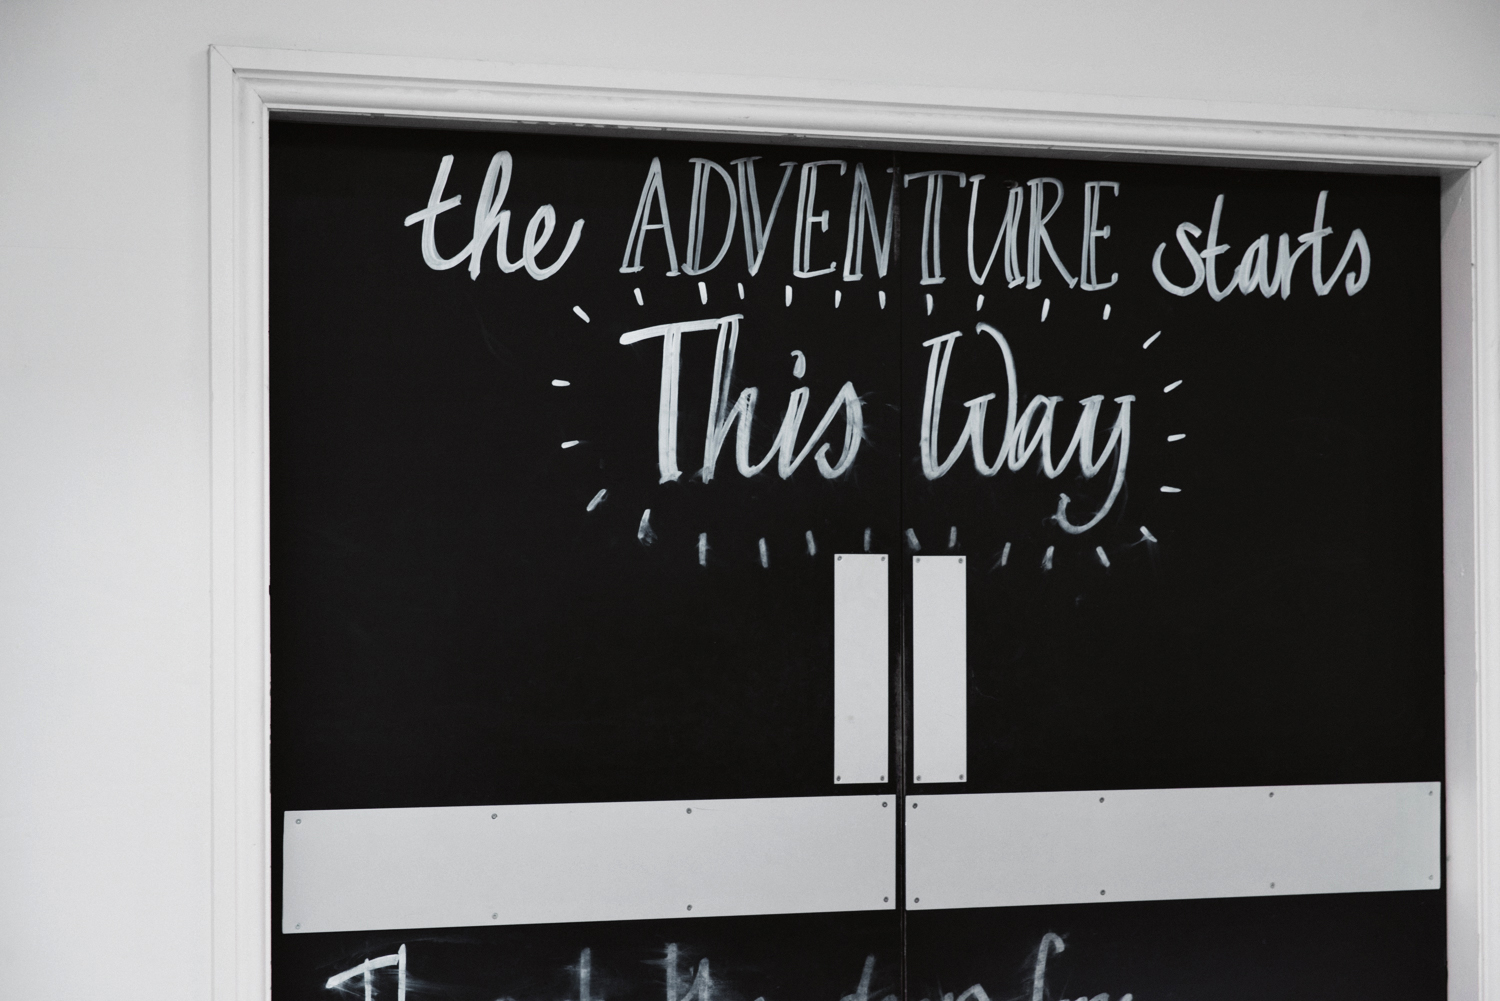 "The adventure starts this way" - at Bounce Below